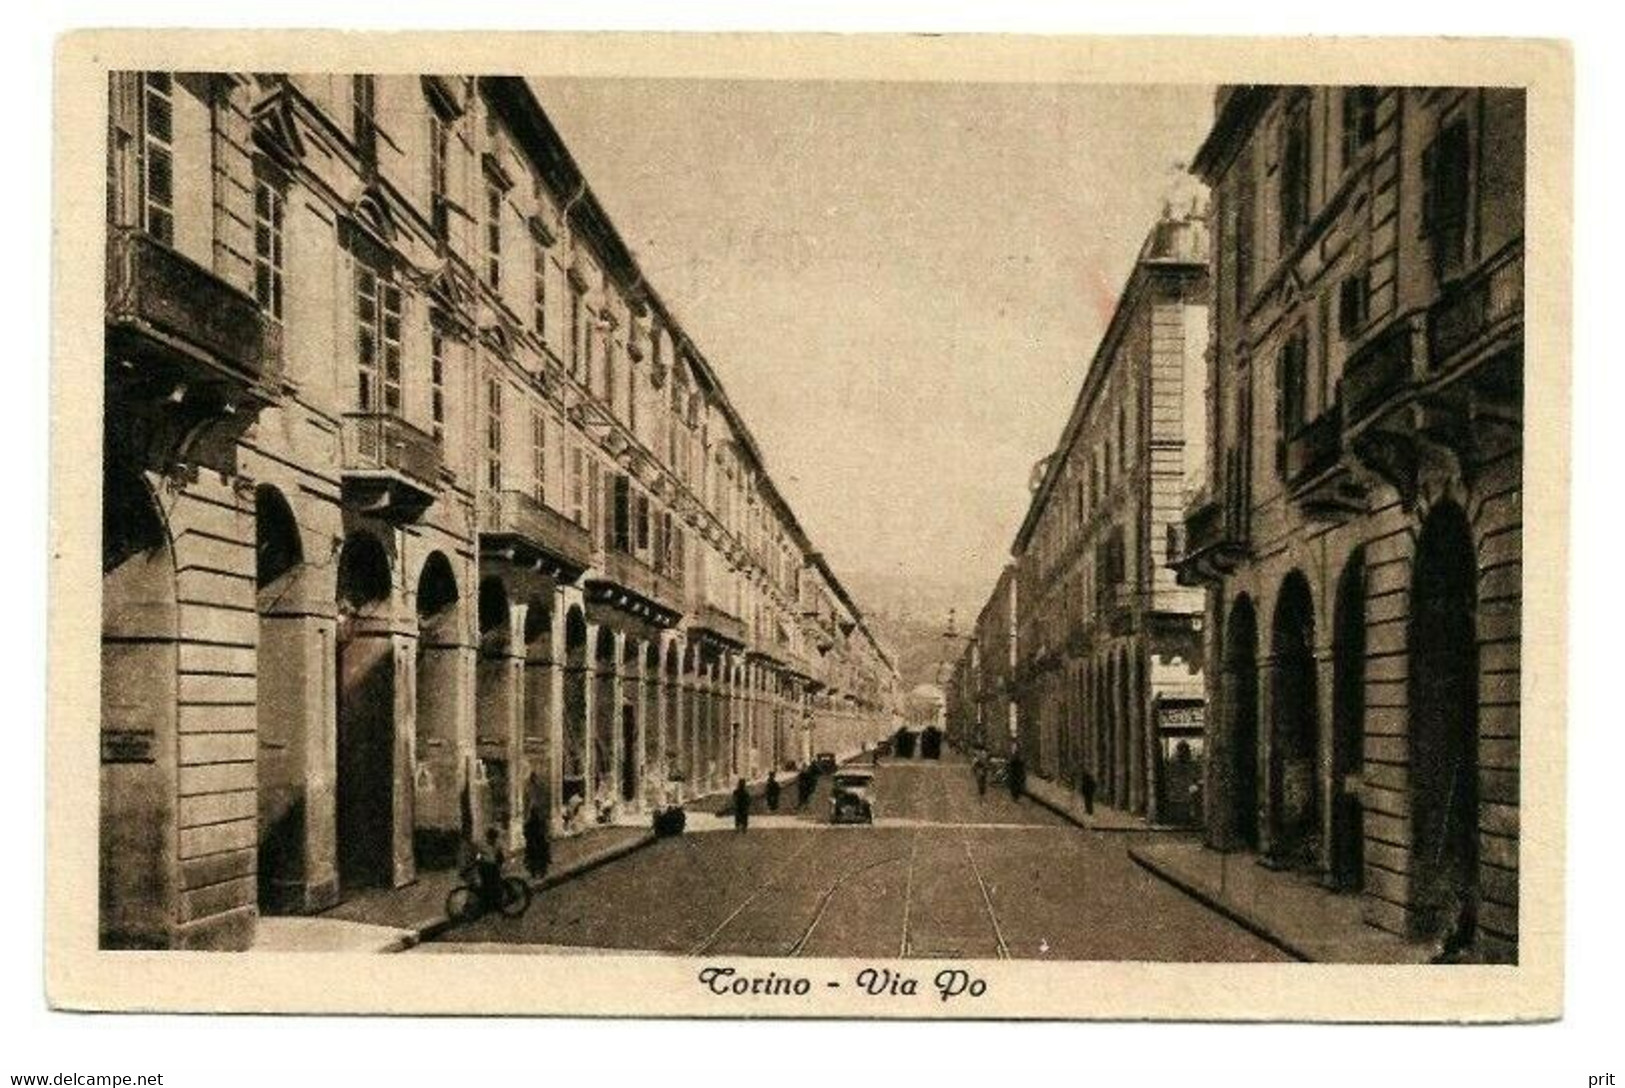 Via Po Torino Turin Piedmont Italy 1951 Vintage Real Photo Postcard, Used In France. Publisher S.A.C.A.T. Torino - Transports